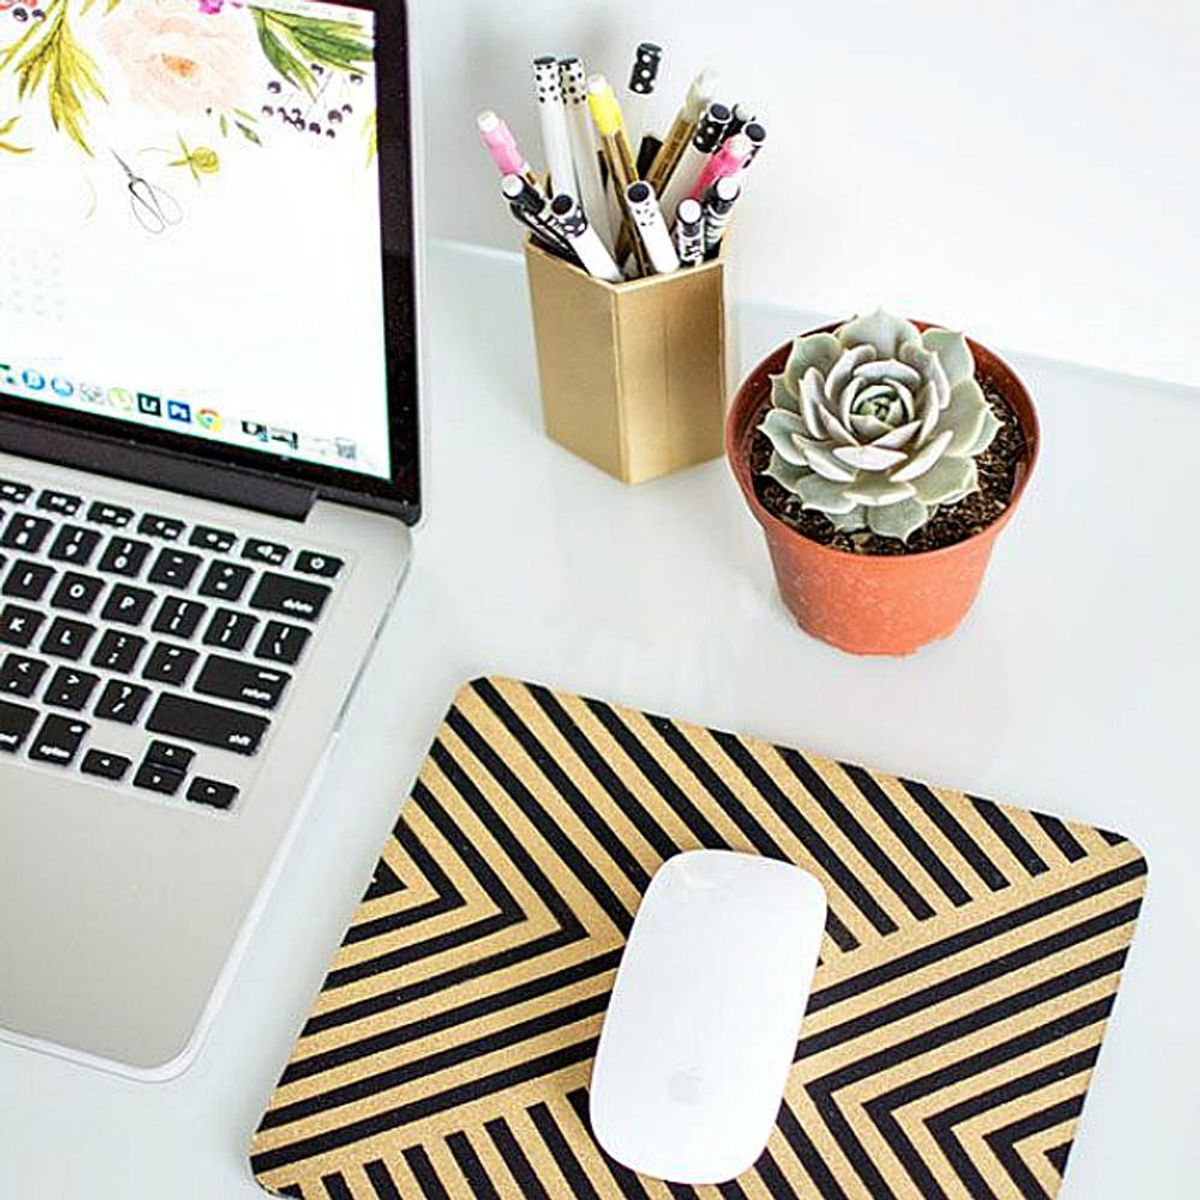 Improve Your Mondays With These 19 Cubicle Decorating Tips